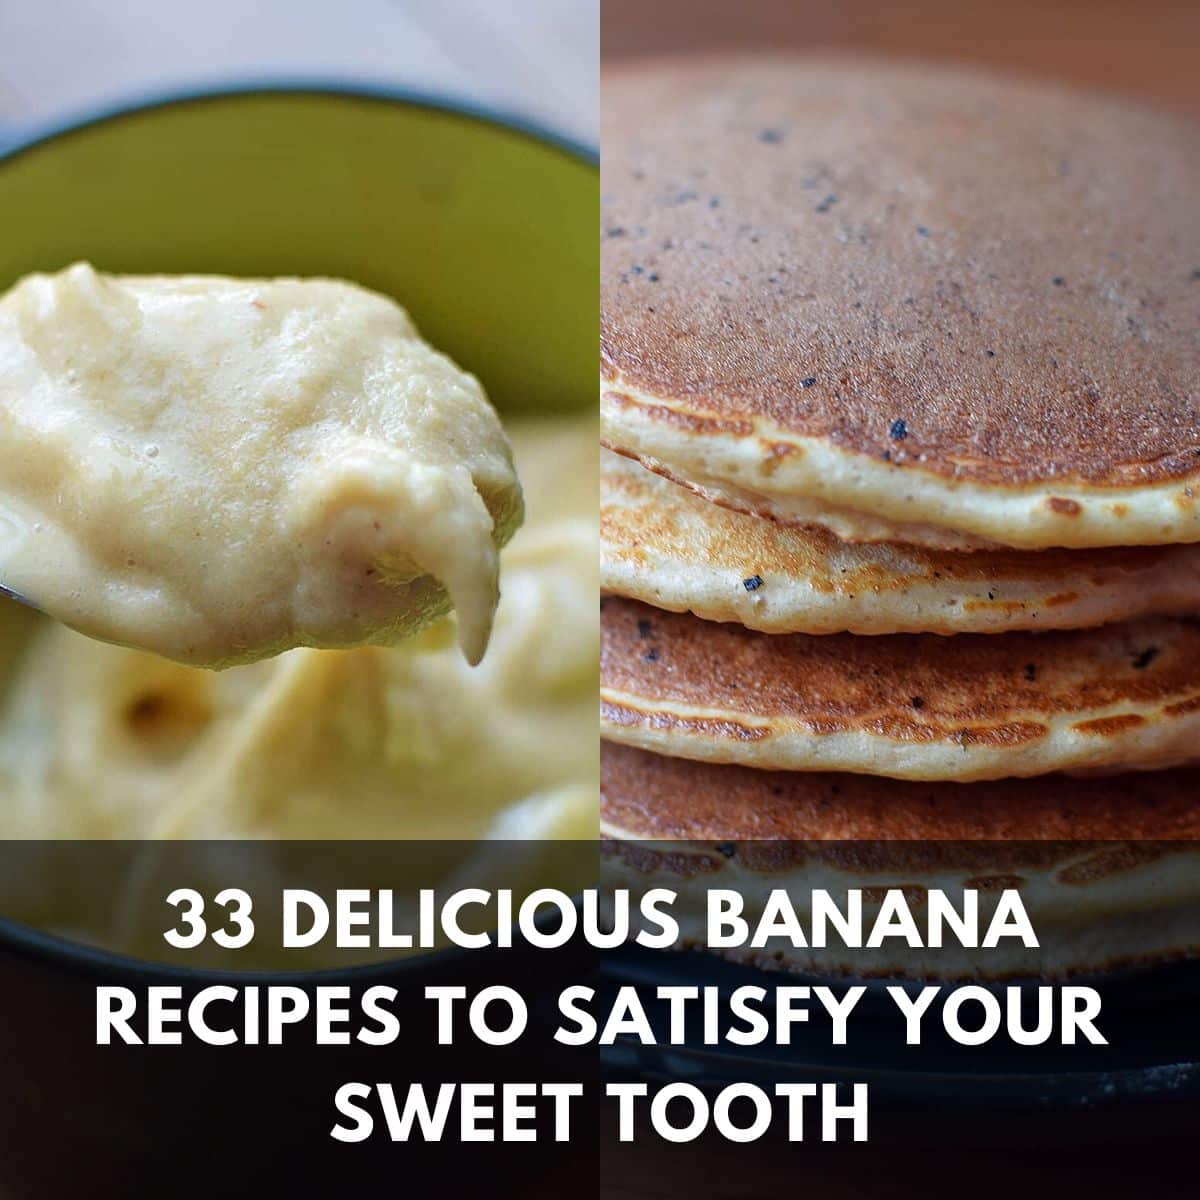 33 delicious banana recipes to satisfy your sweet tooth main